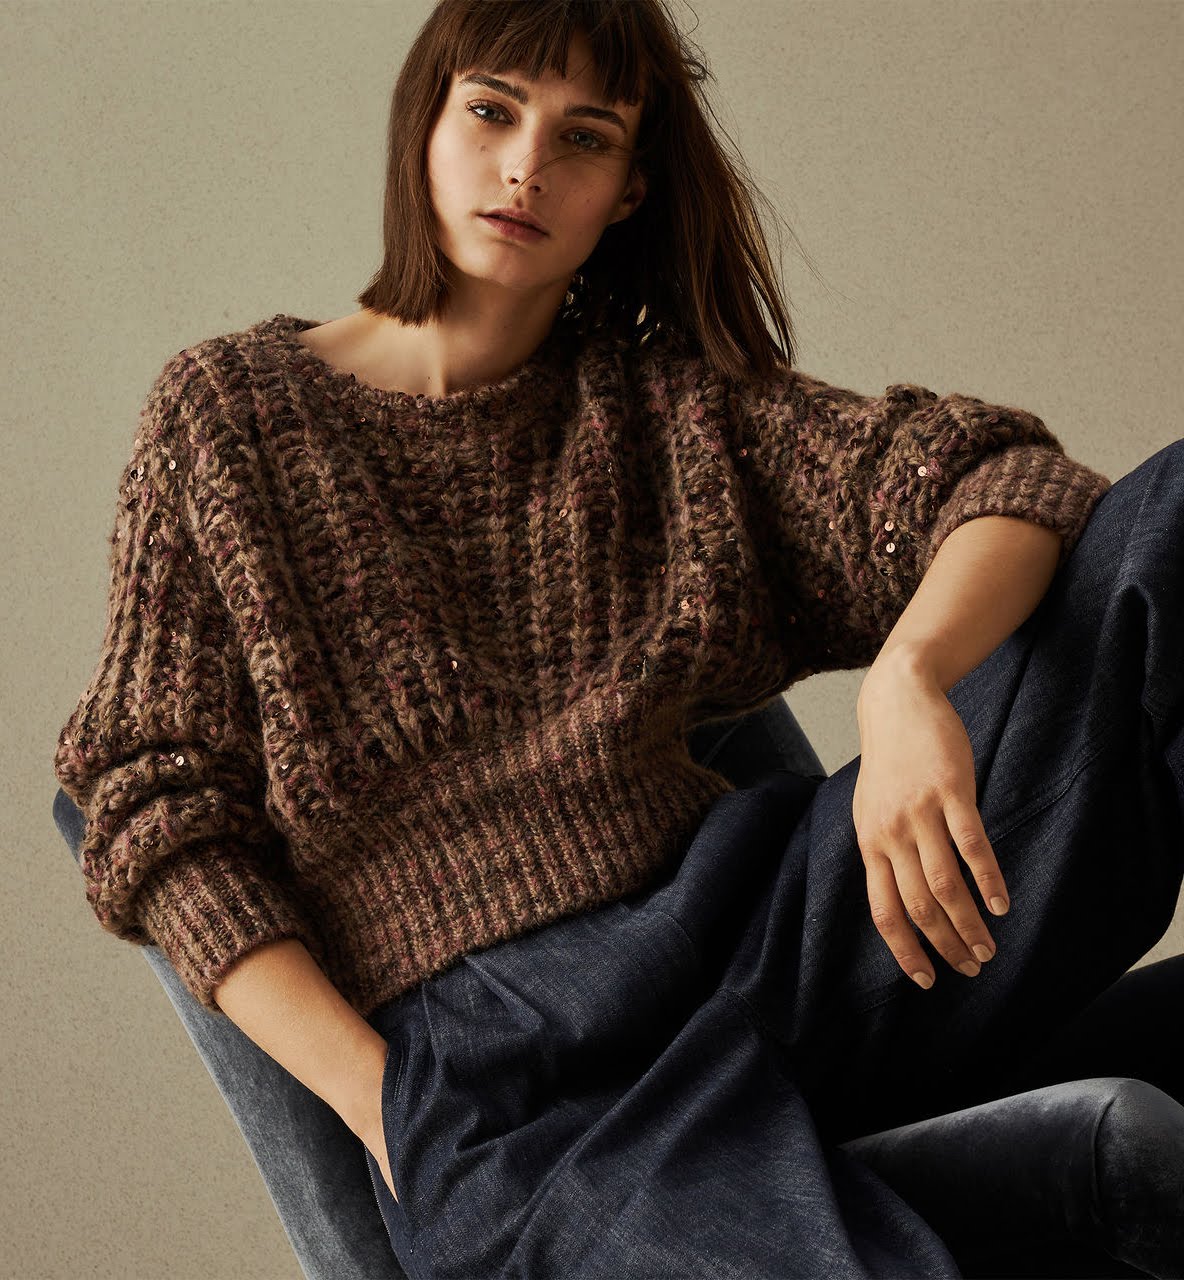 MUST HAVE: The idea of crafting luxurious, wearable knitwear is what ...